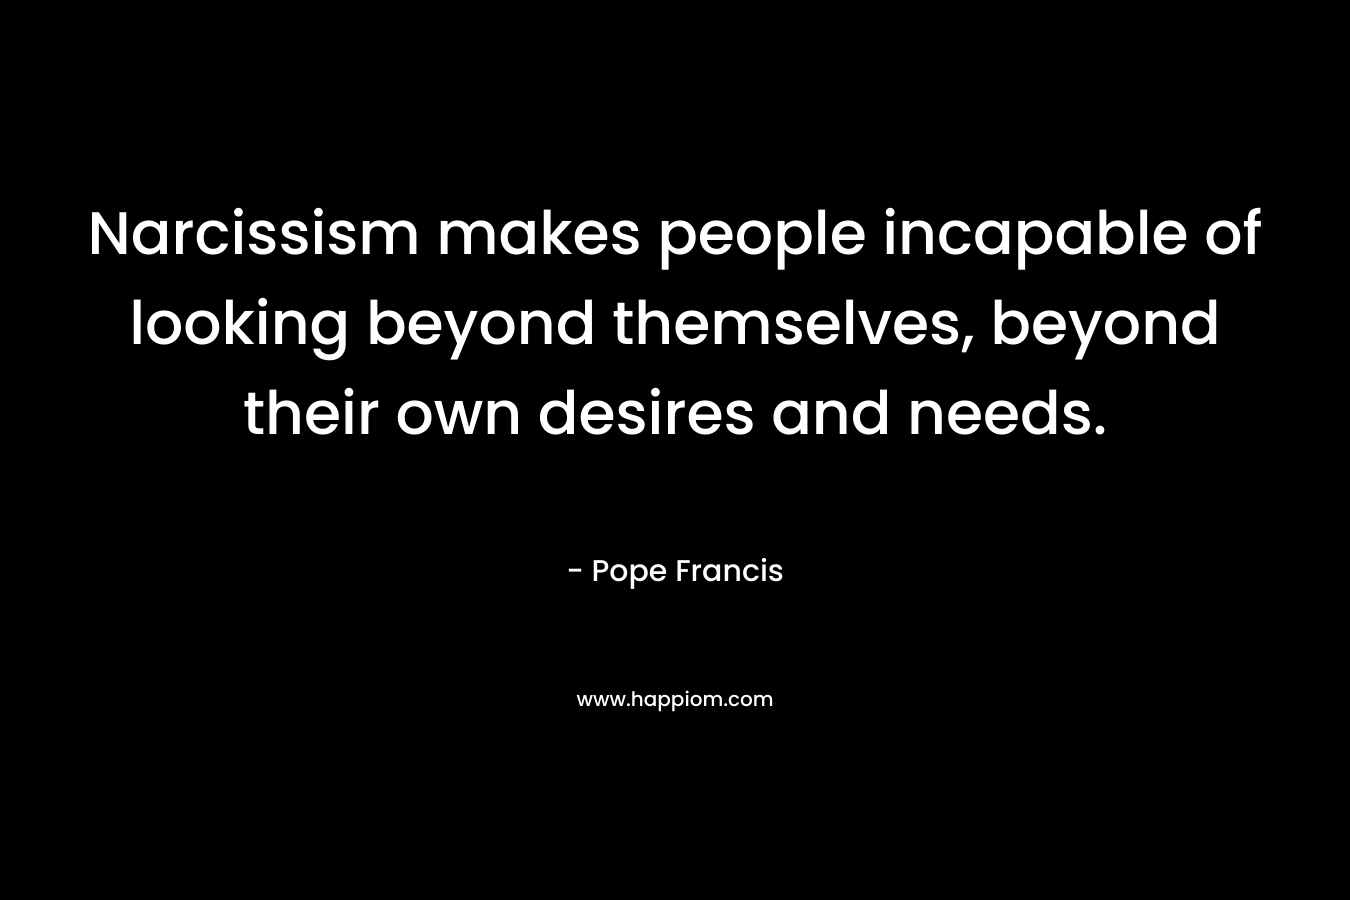 Narcissism makes people incapable of looking beyond themselves, beyond their own desires and needs. – Pope Francis